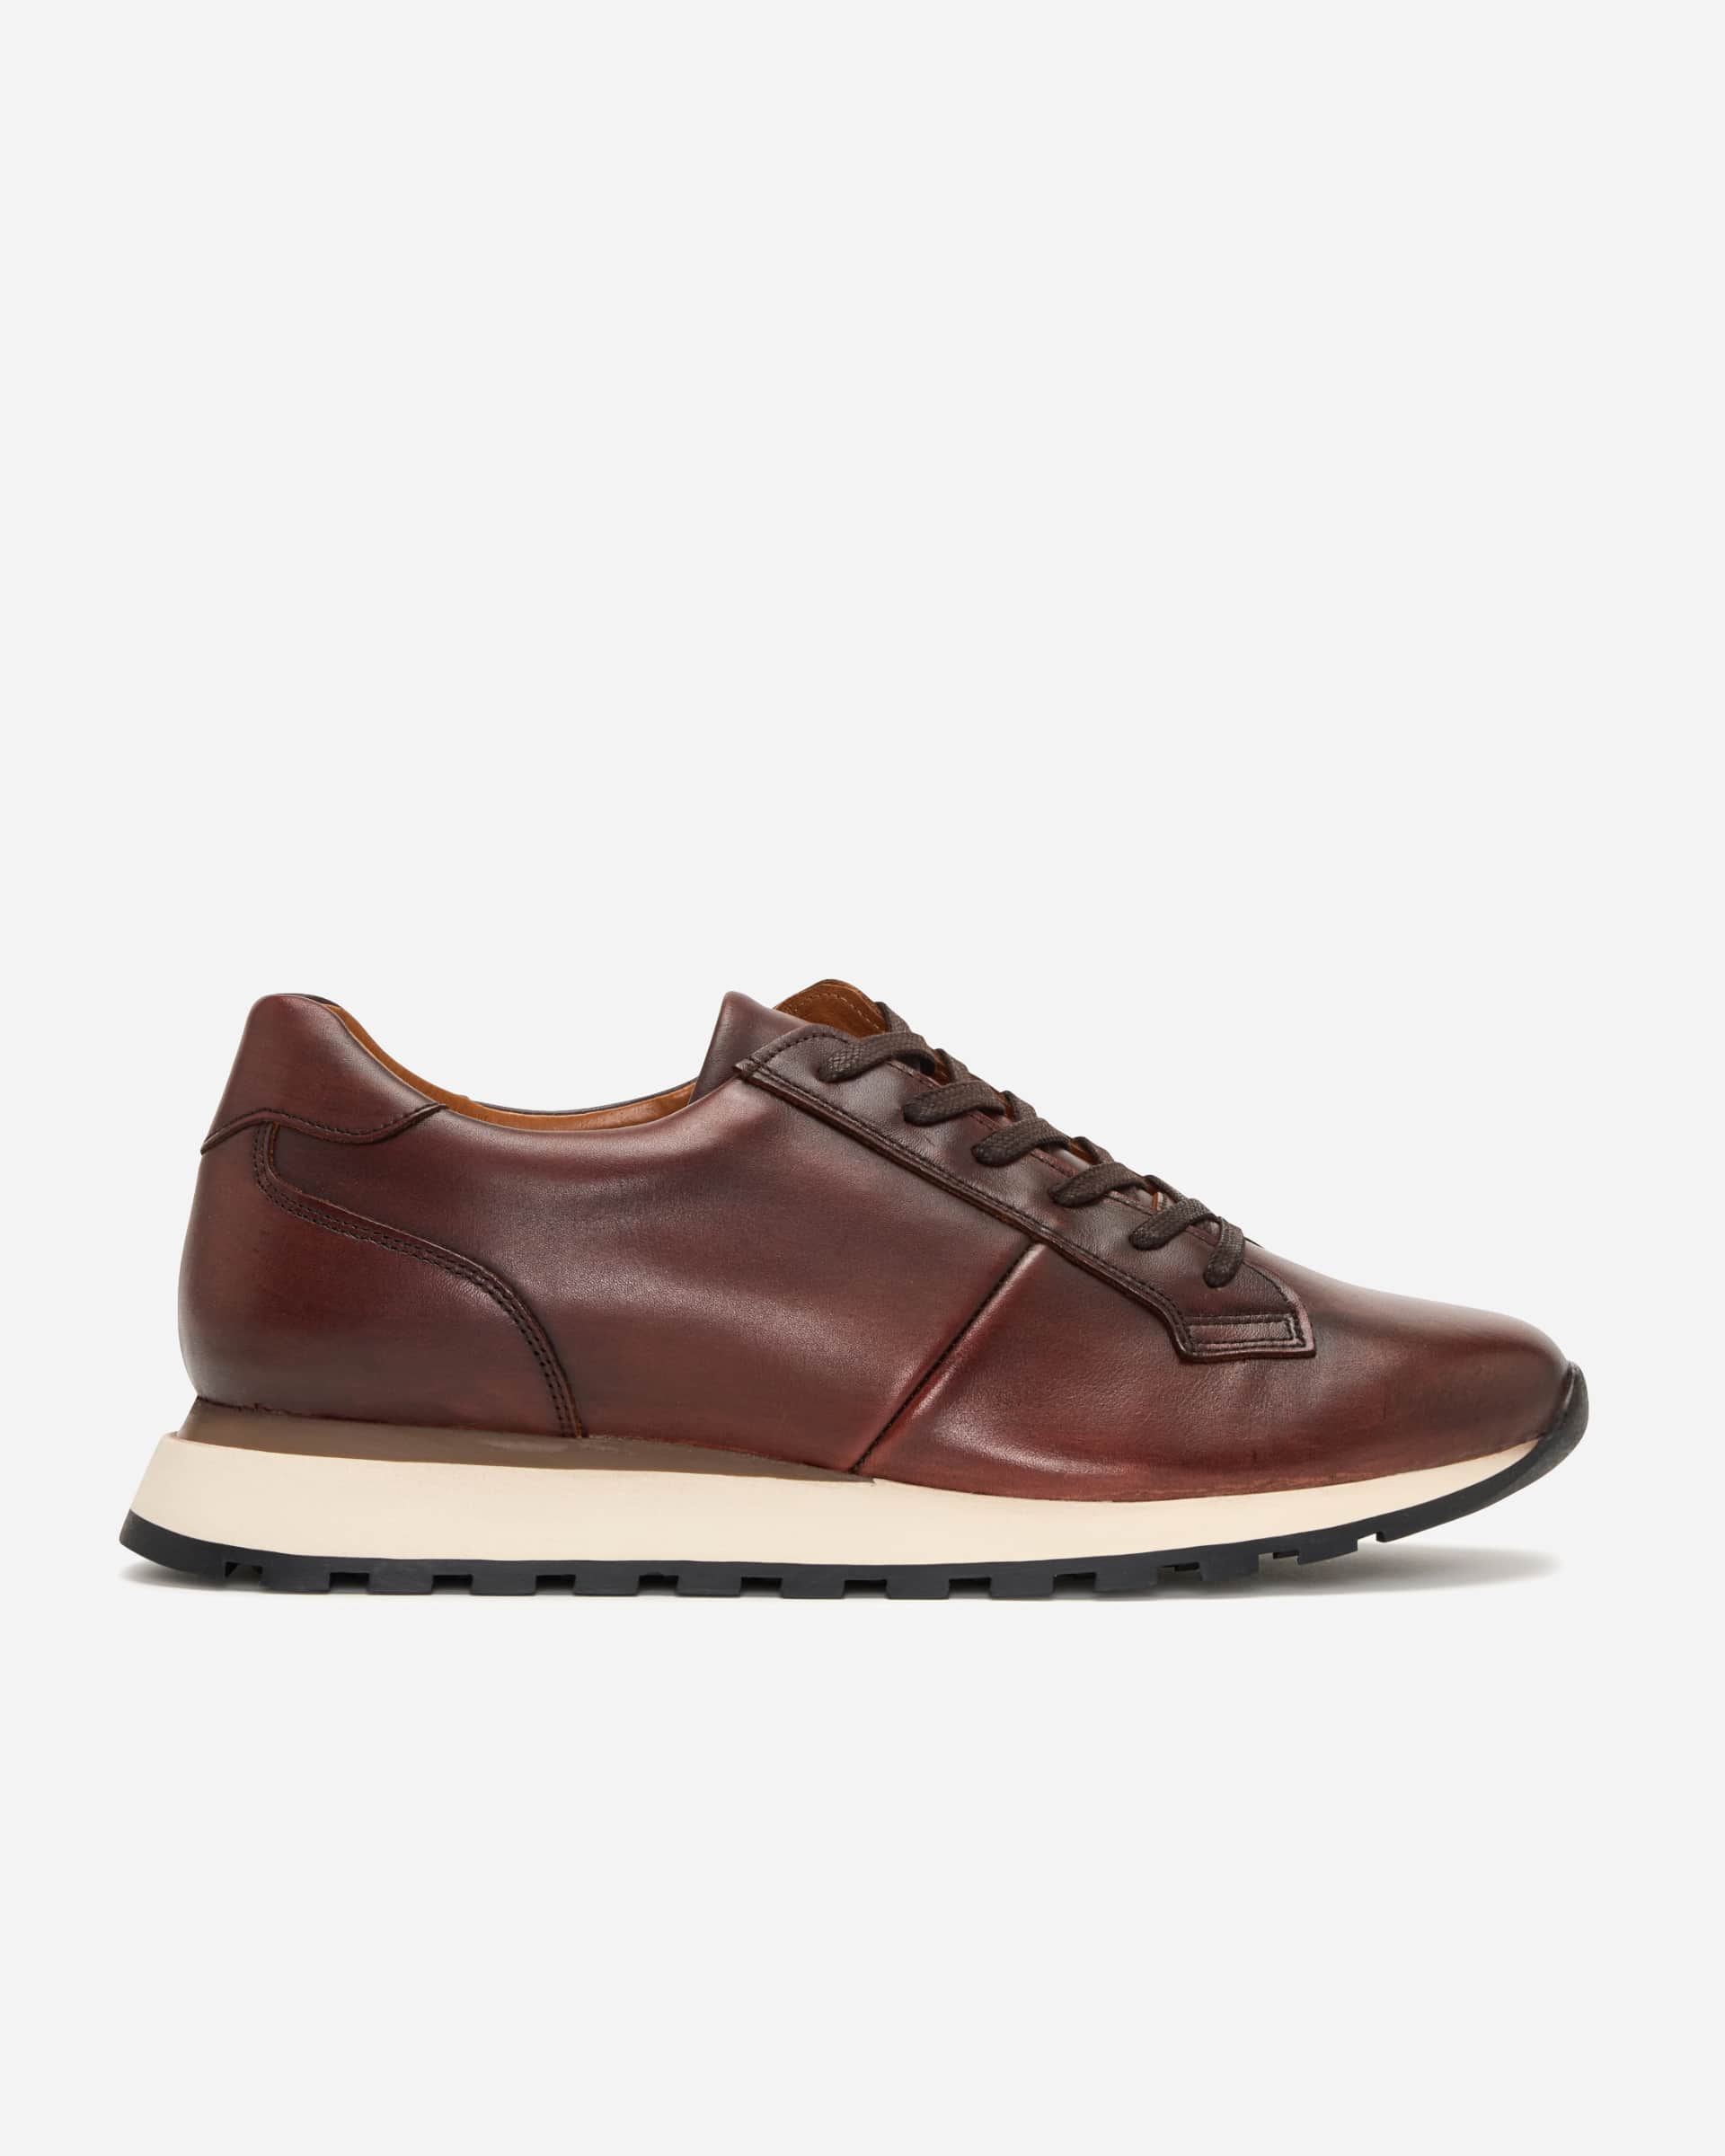 Florentino Sports Leather Sneaker - Men's Shoes at Menzclub